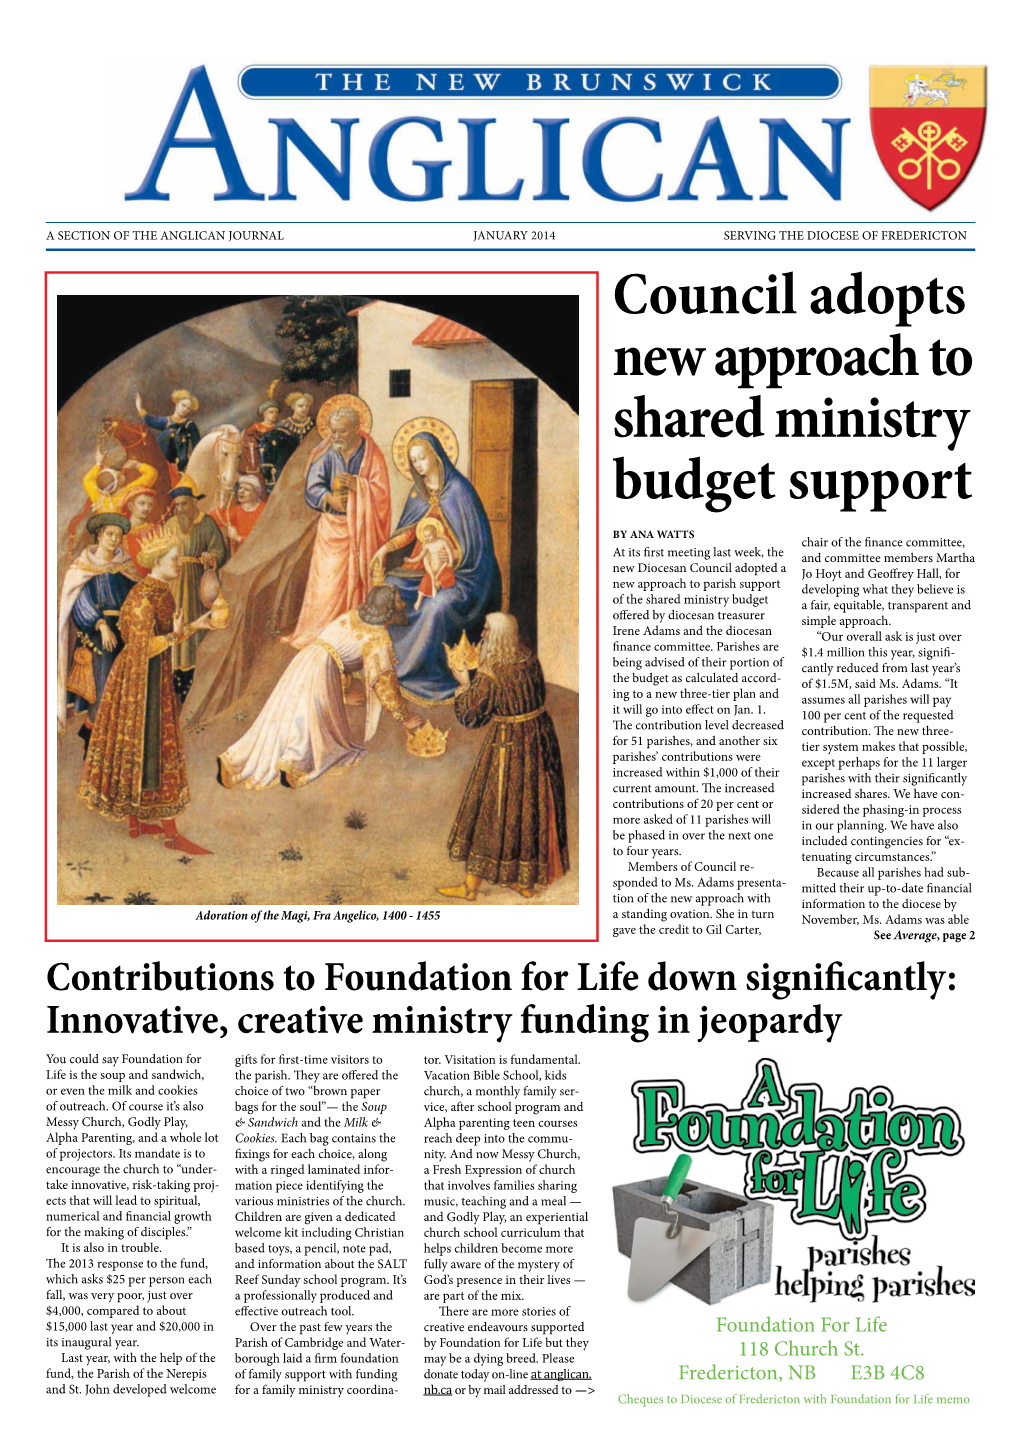 Council Adopts New Approach to Shared Ministry Budget Support